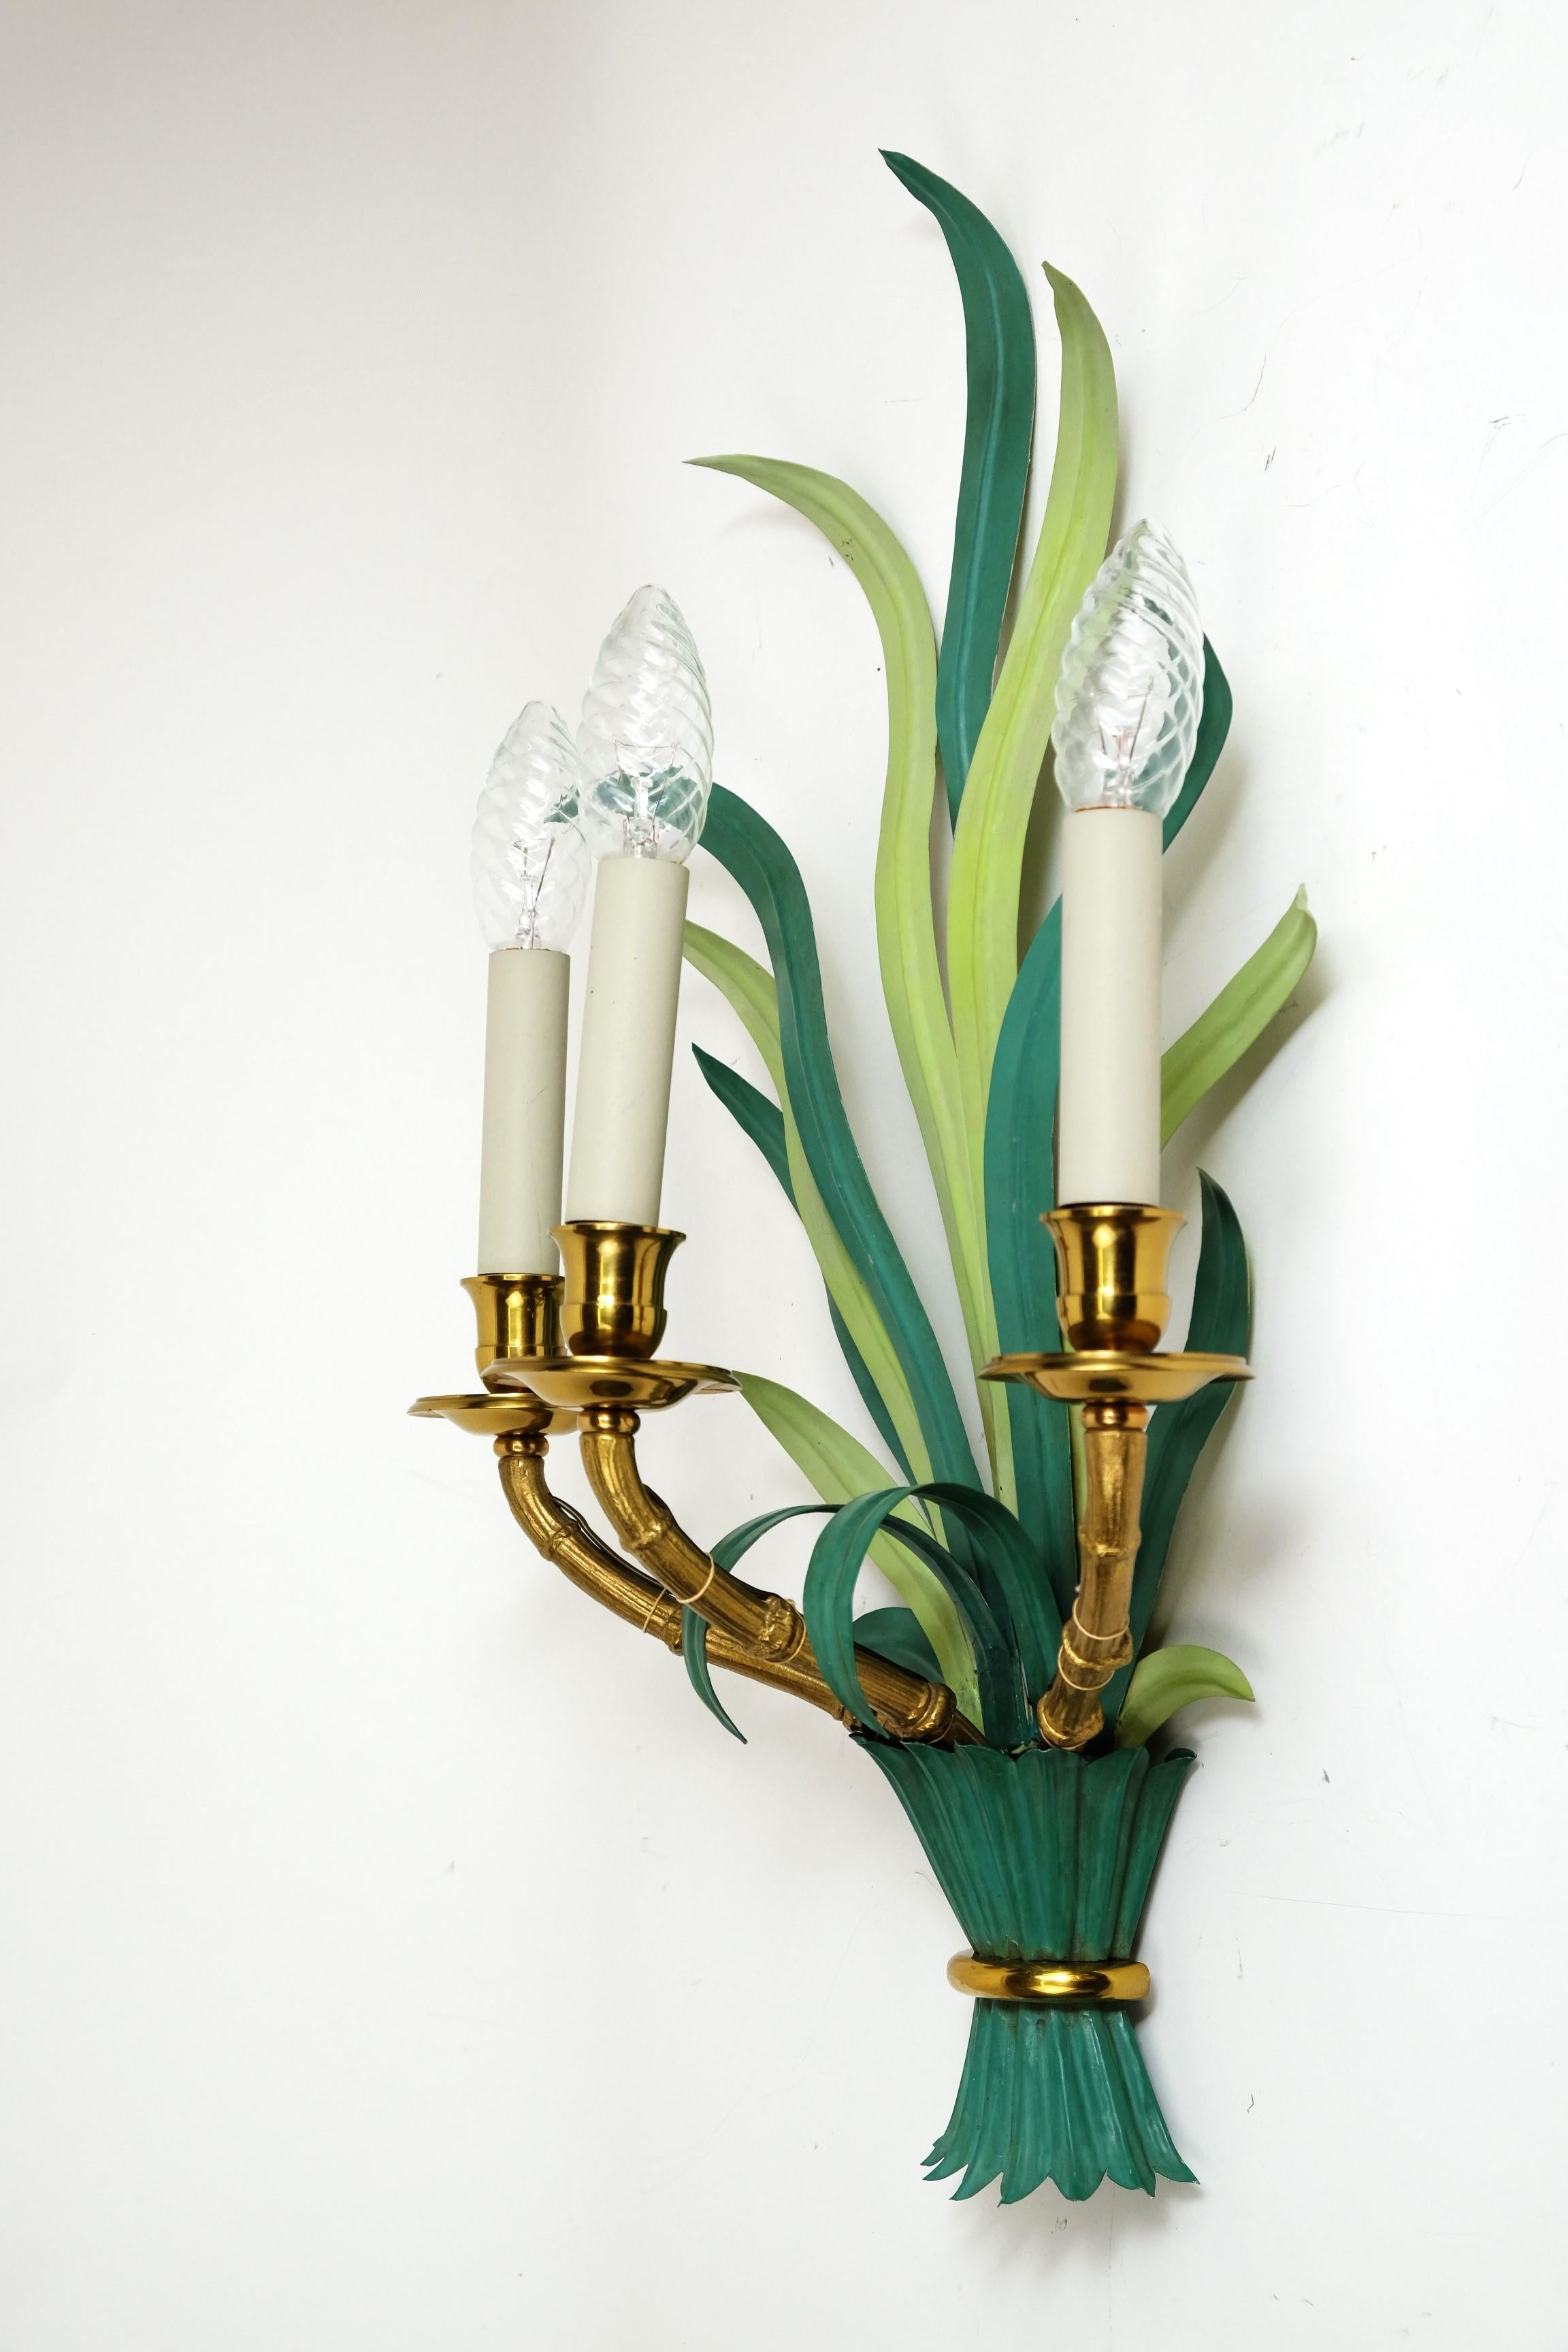 Pair of Wall Lamps / Sconces by Maison Bagues Bamboo Palm Leaves, France 1950s For Sale 2